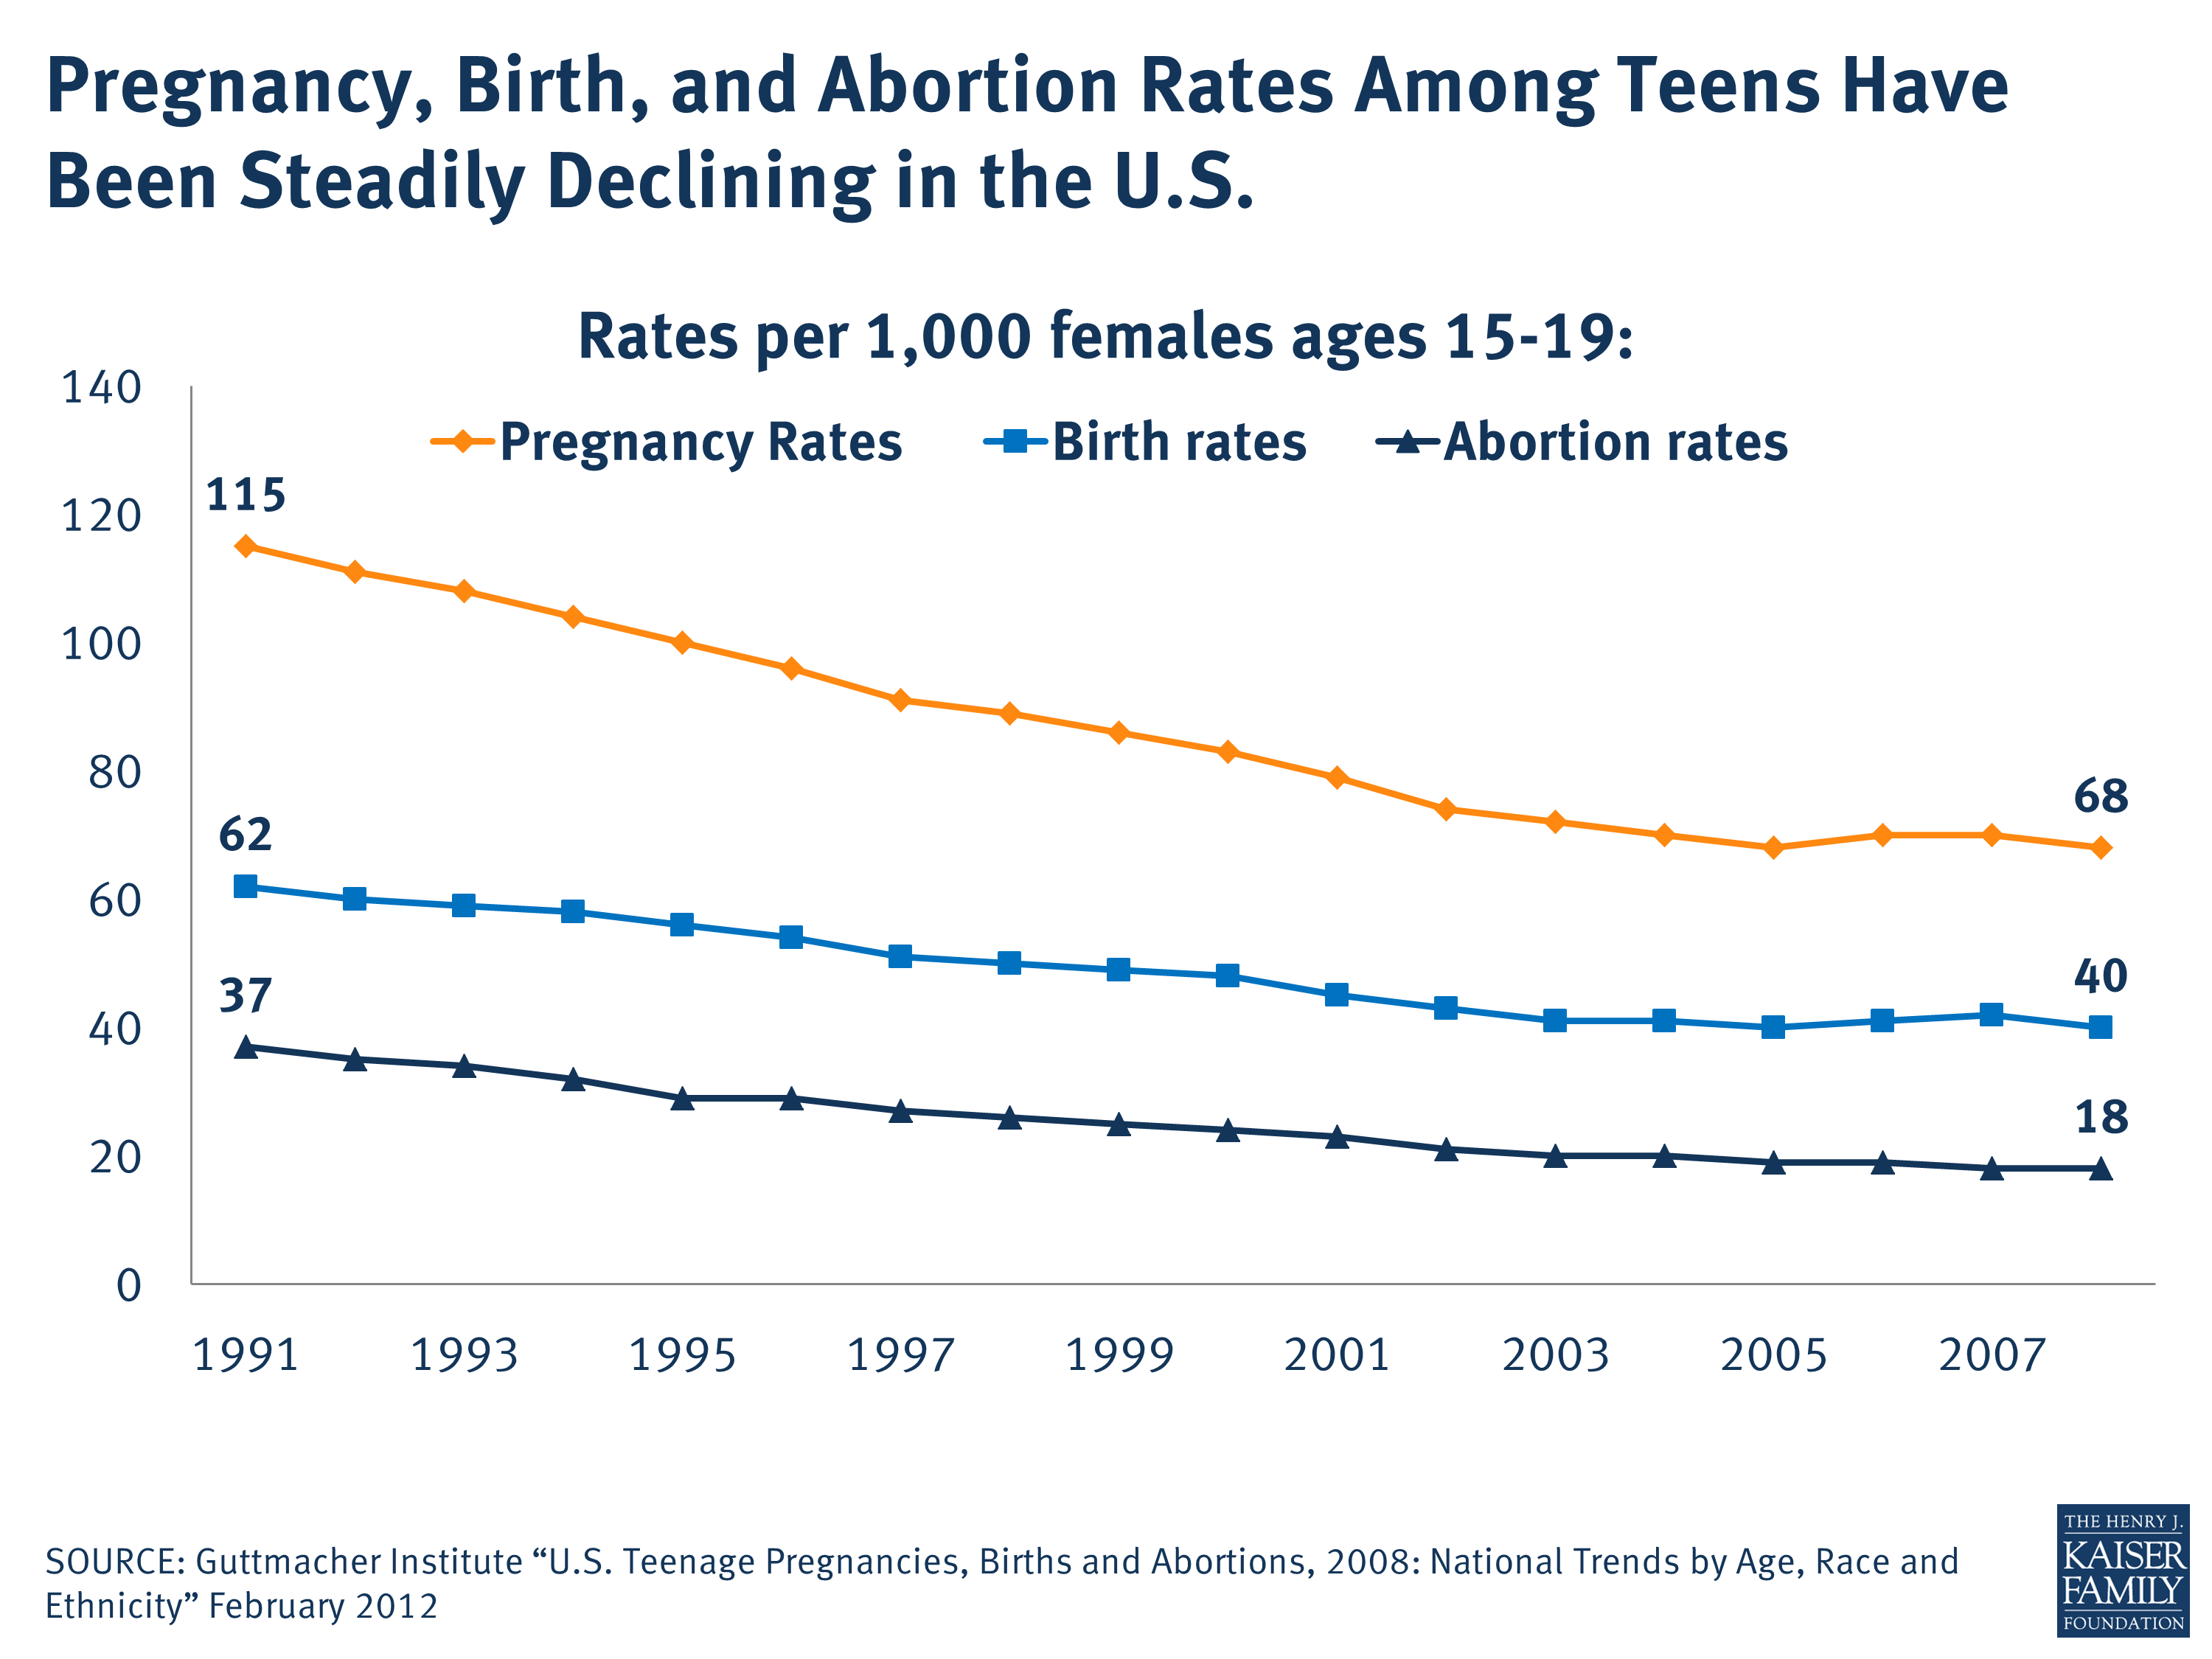 Pregnancy, Birth, and Abortion Rates Among Teens Have Been Steadily